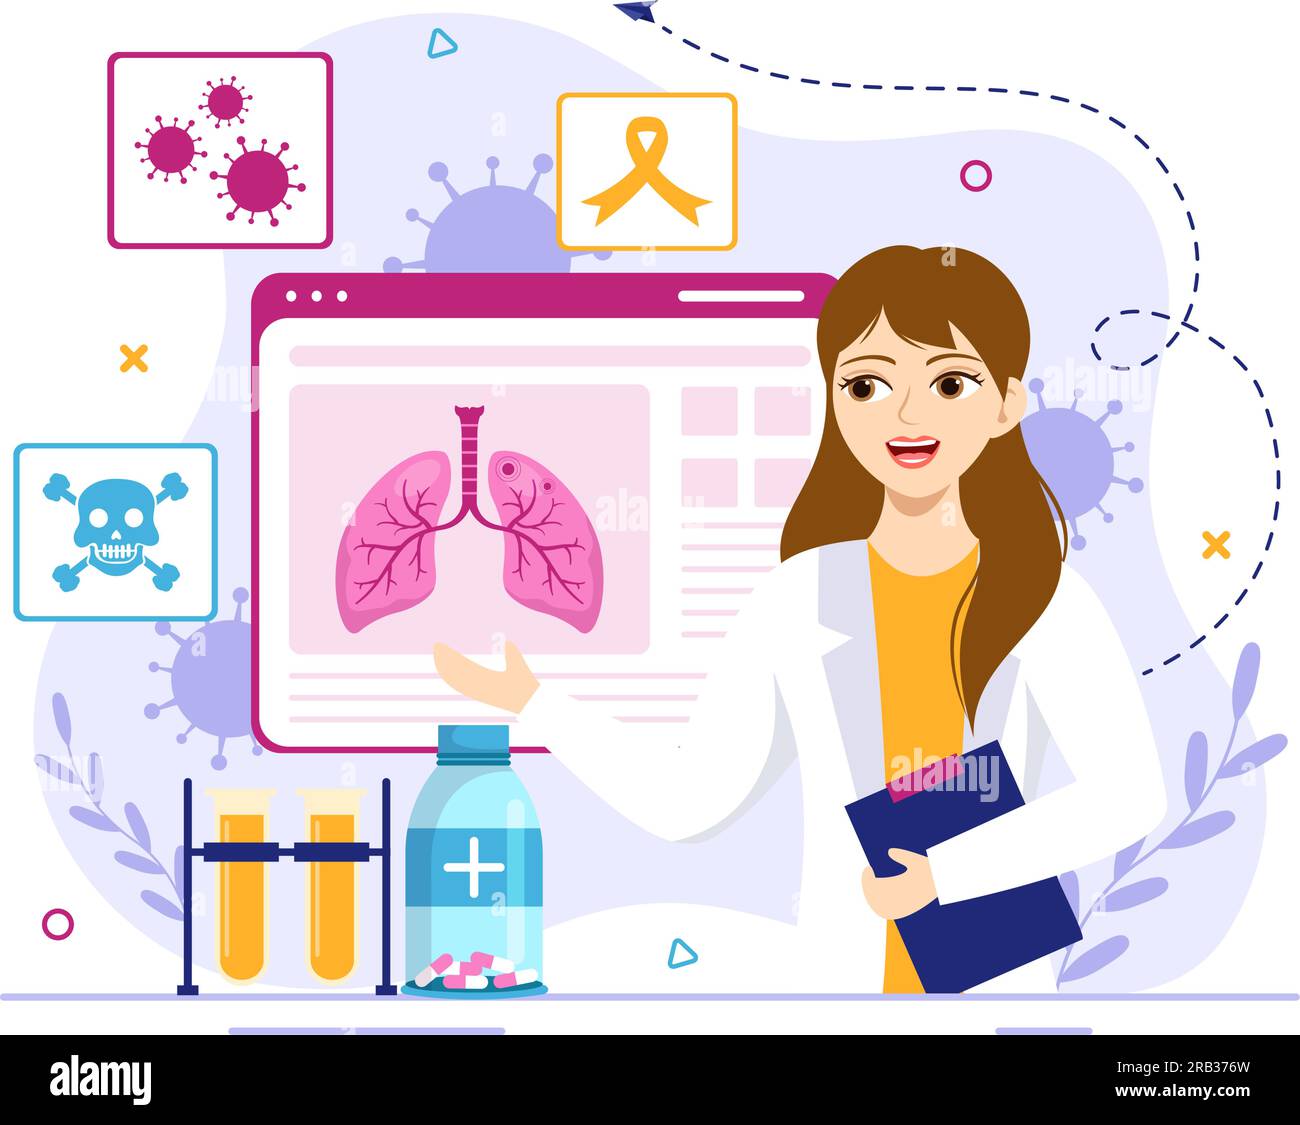 Respiratory Infection Vector Illustration of Inflammation in the Lungs with Virus Cells in Healthcare Background Flat Cartoon Hand Drawn Templates Stock Vector